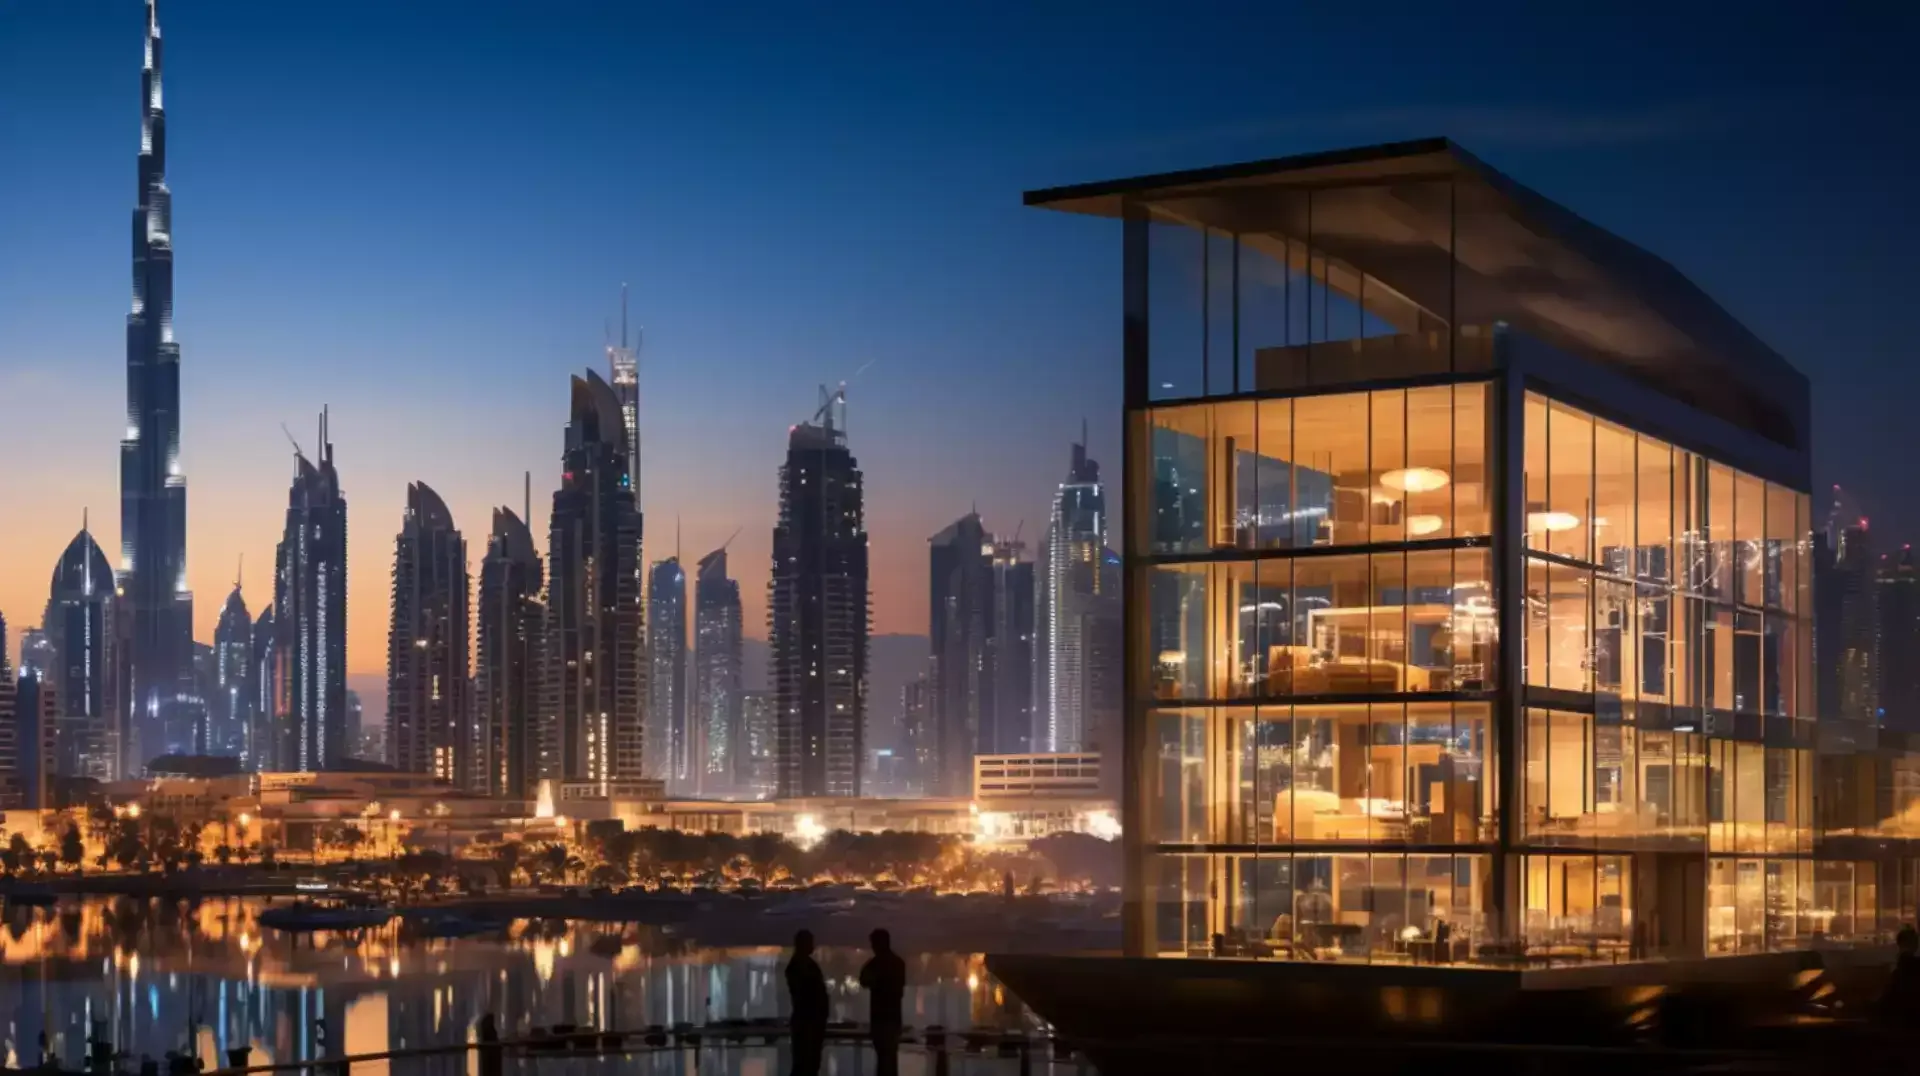 Visual representation of investment potential in Dubai's real estate sector